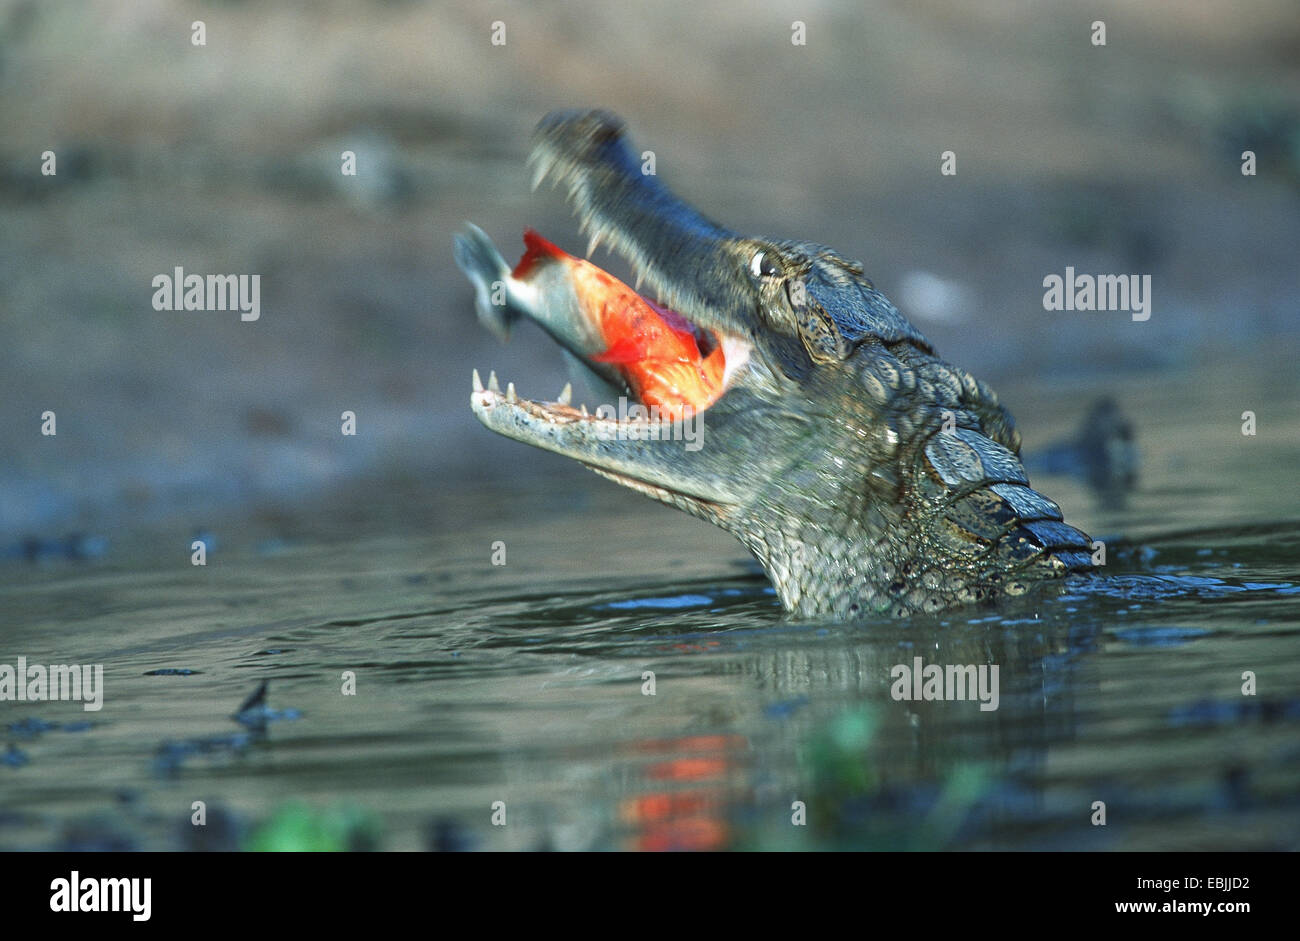 spectacled caiman (Caiman crocodilus), in the water, eating a caught fish, Venezuela, Hato El cedral Stock Photo